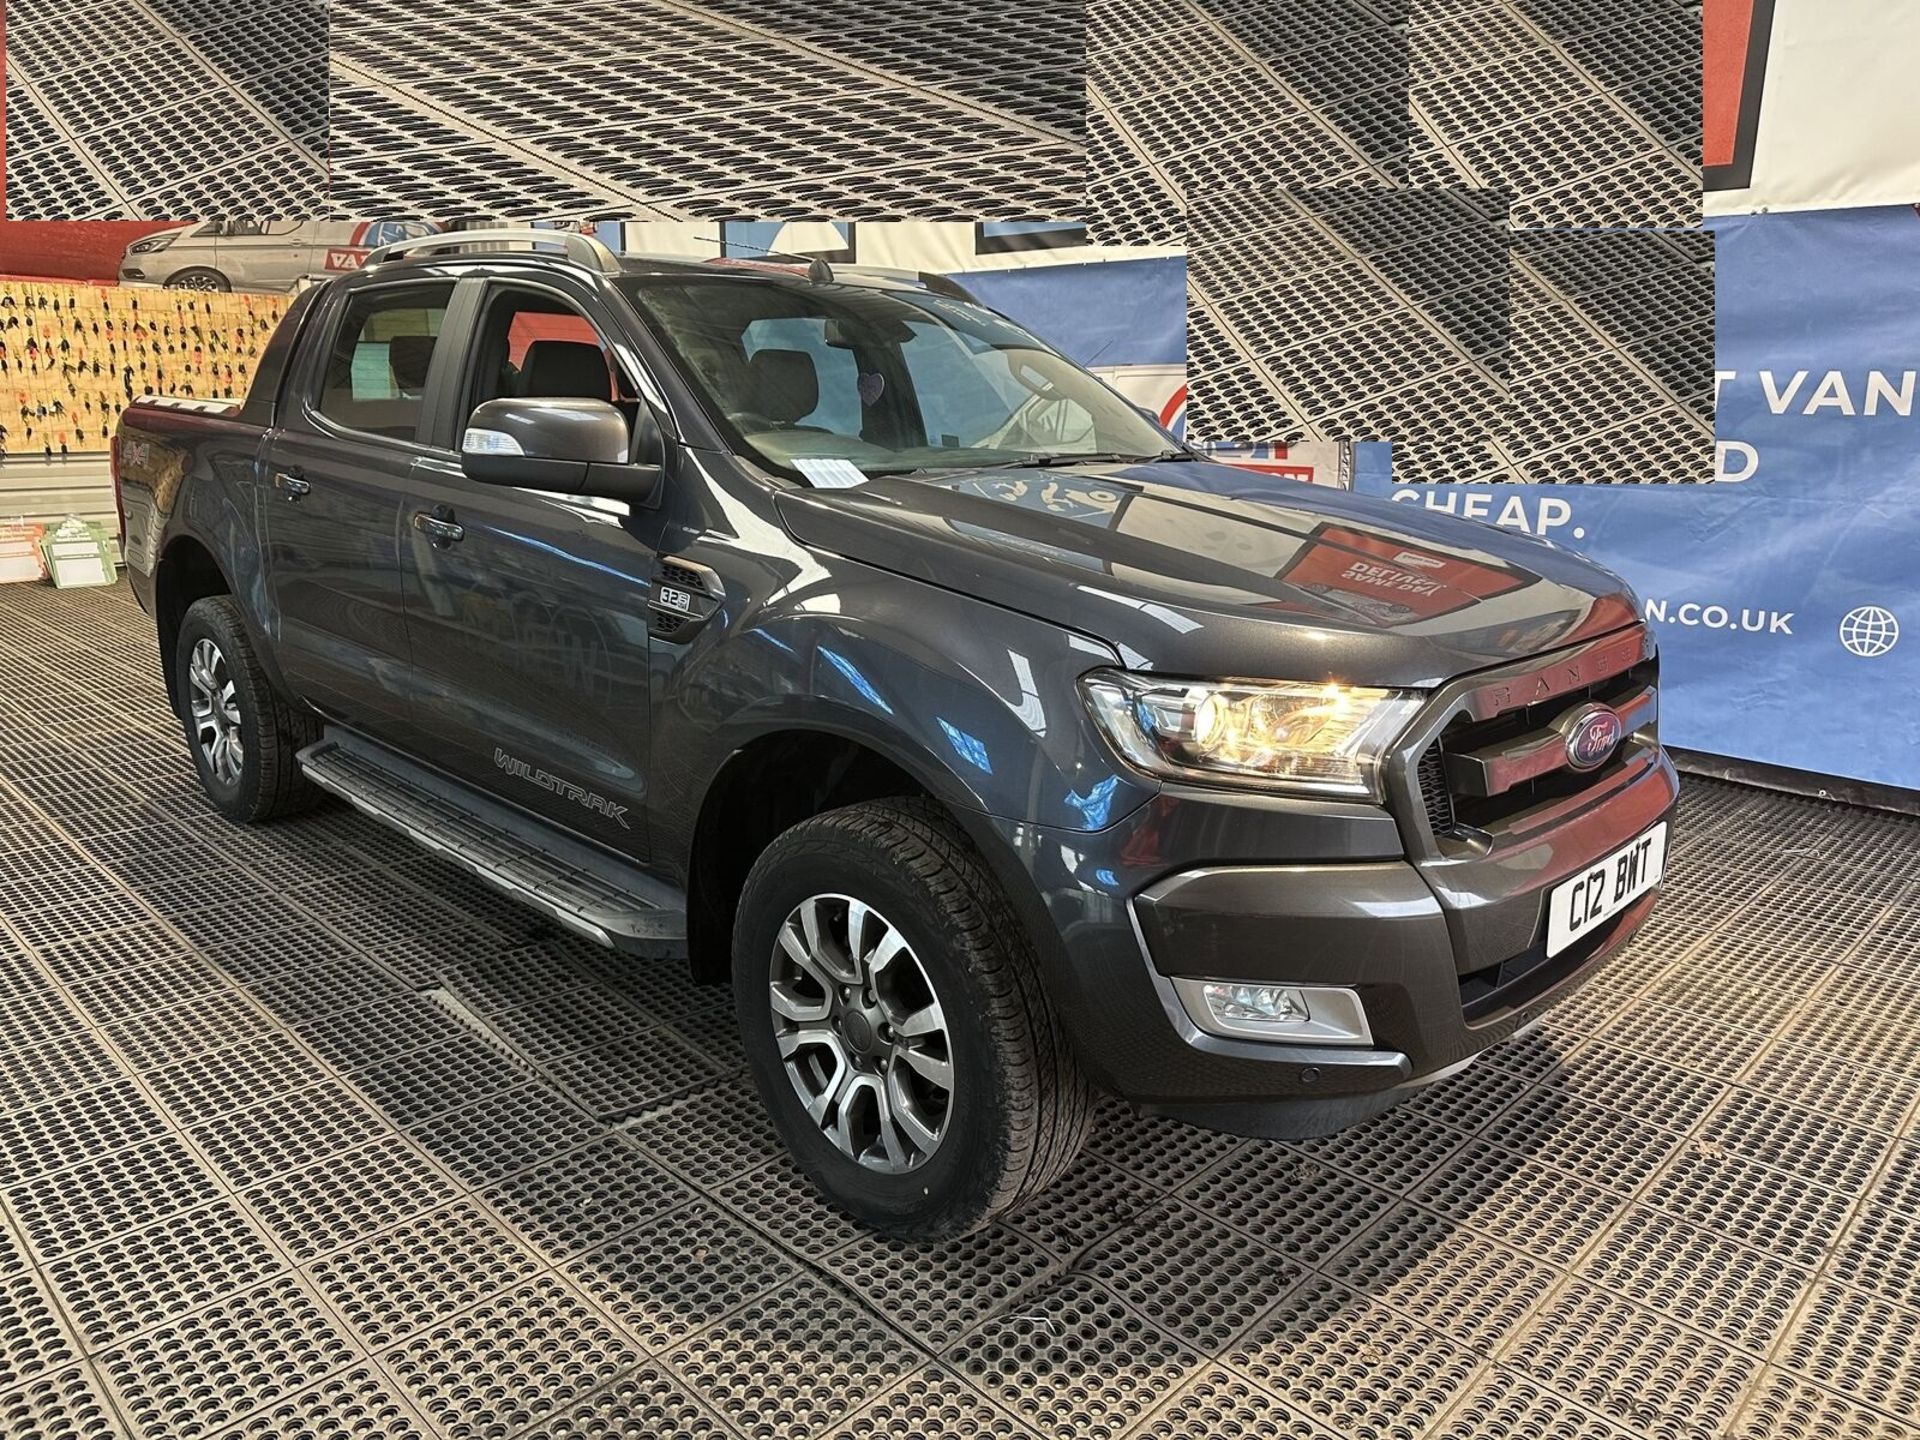 LUXURY PICK-UP: FORD RANGER WILDTRAK, 3.2 TDCI 200, AUTO, EURO 6, CLEAR HPI